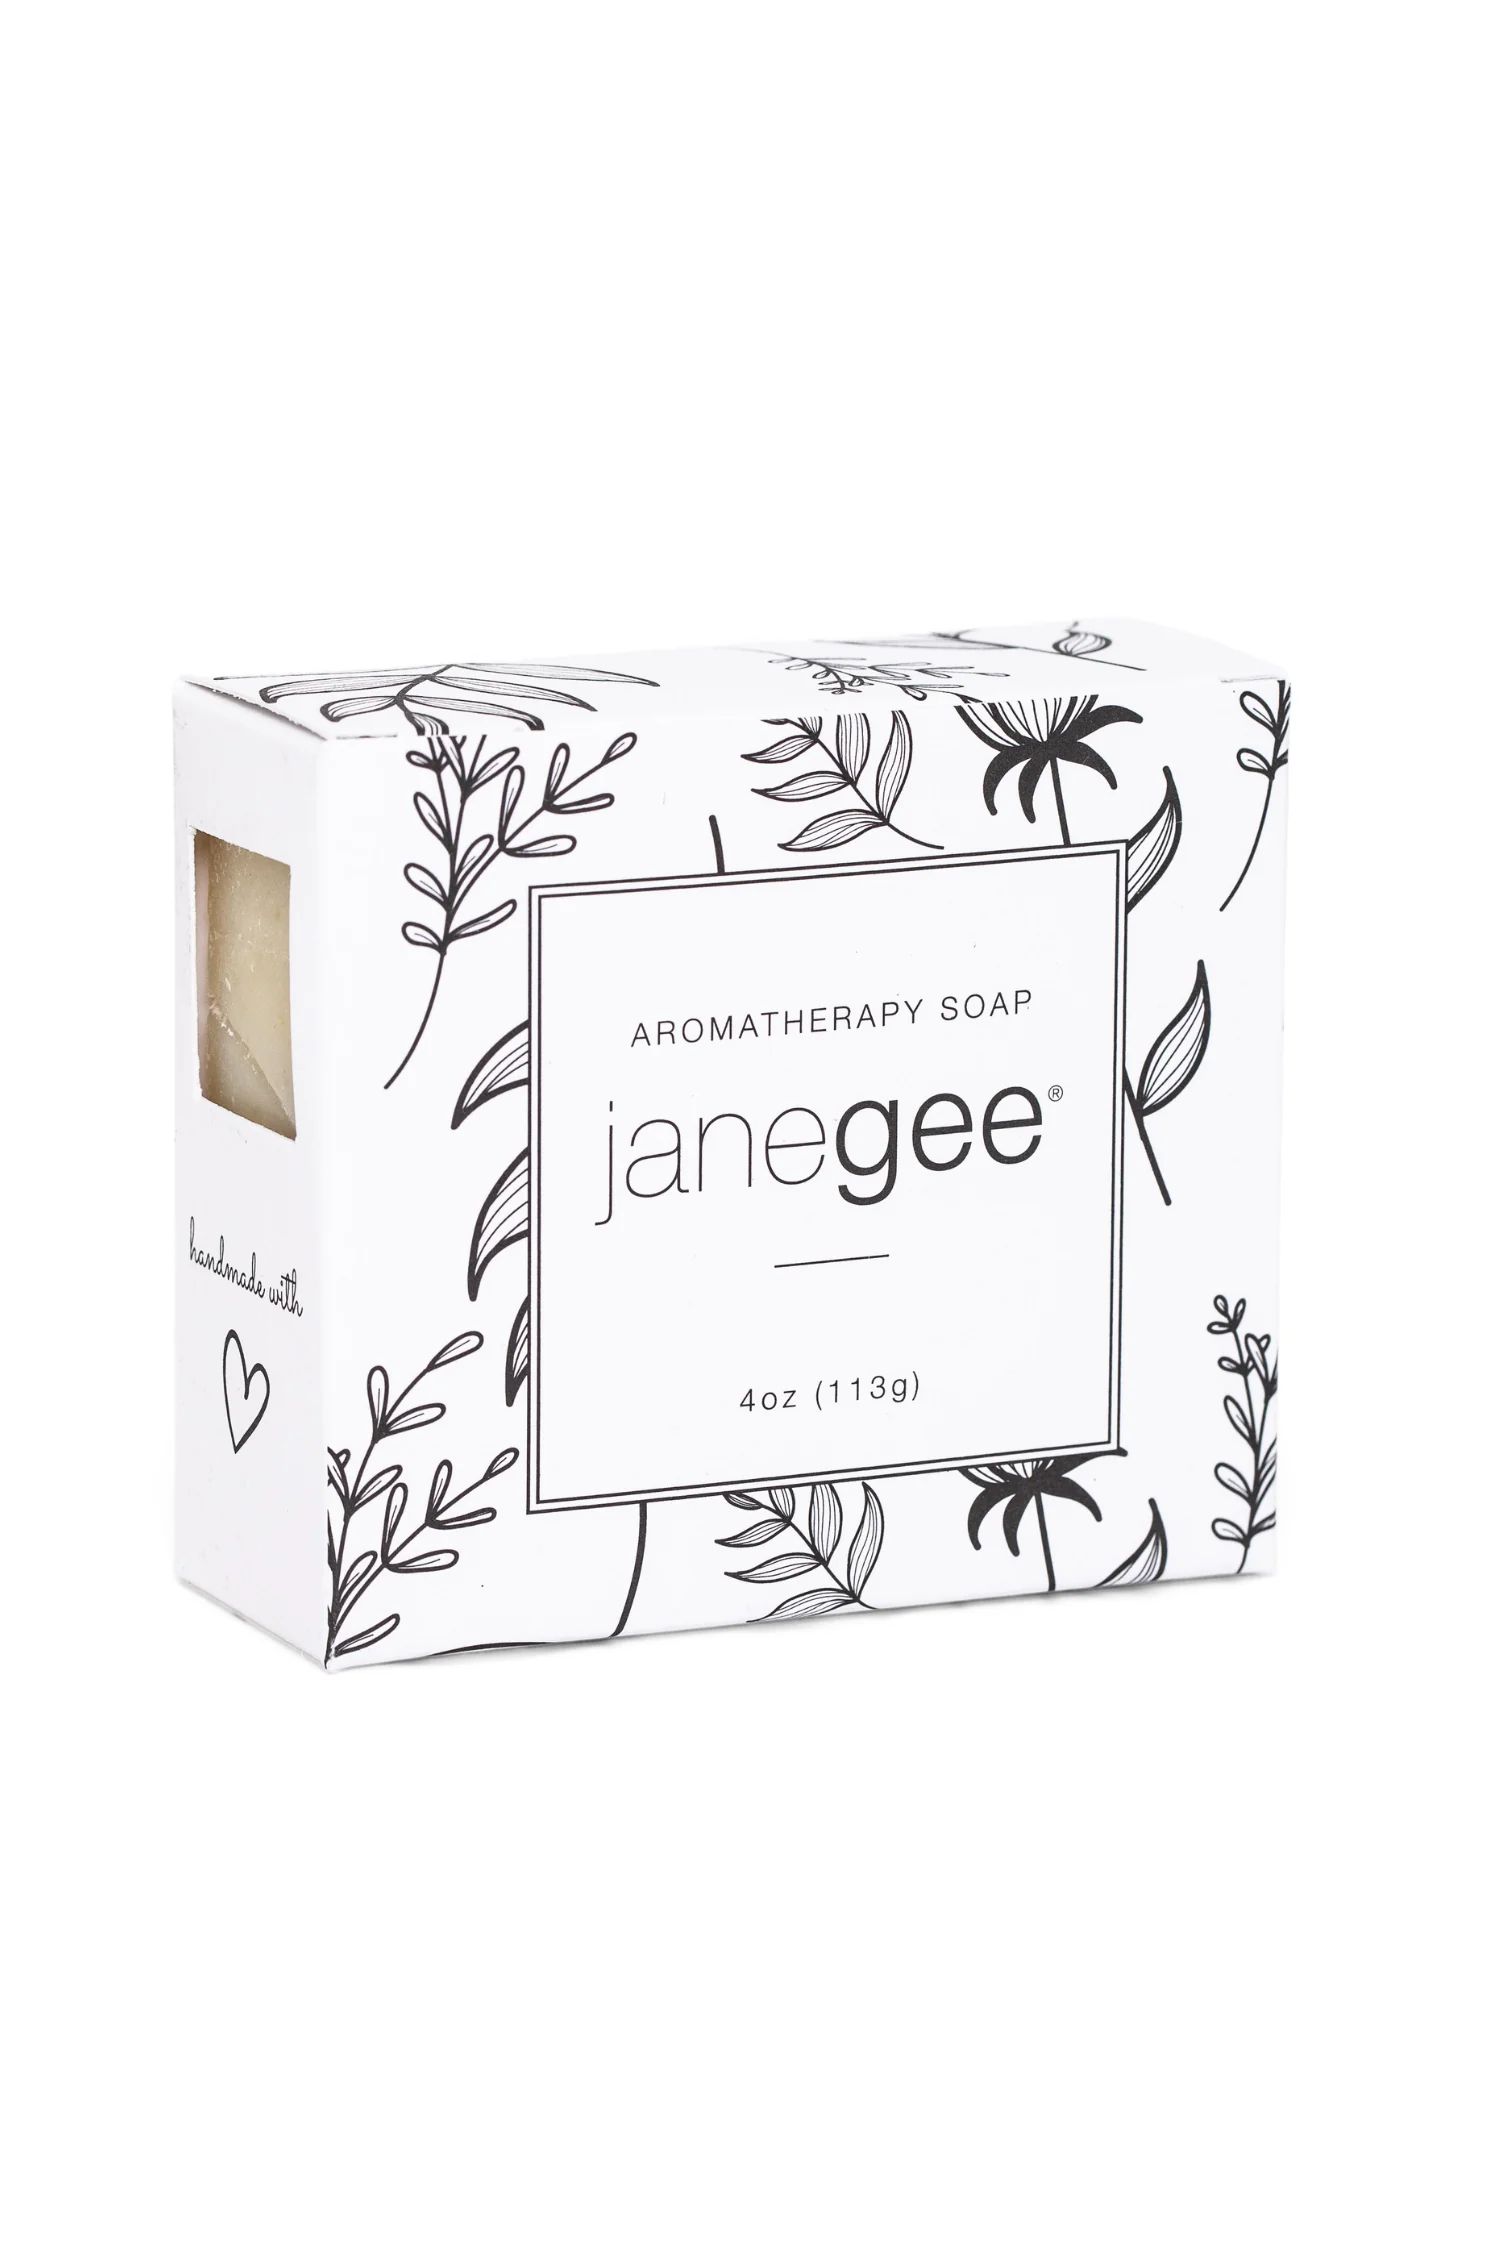 janegee Aromatherapy Soap | janegee